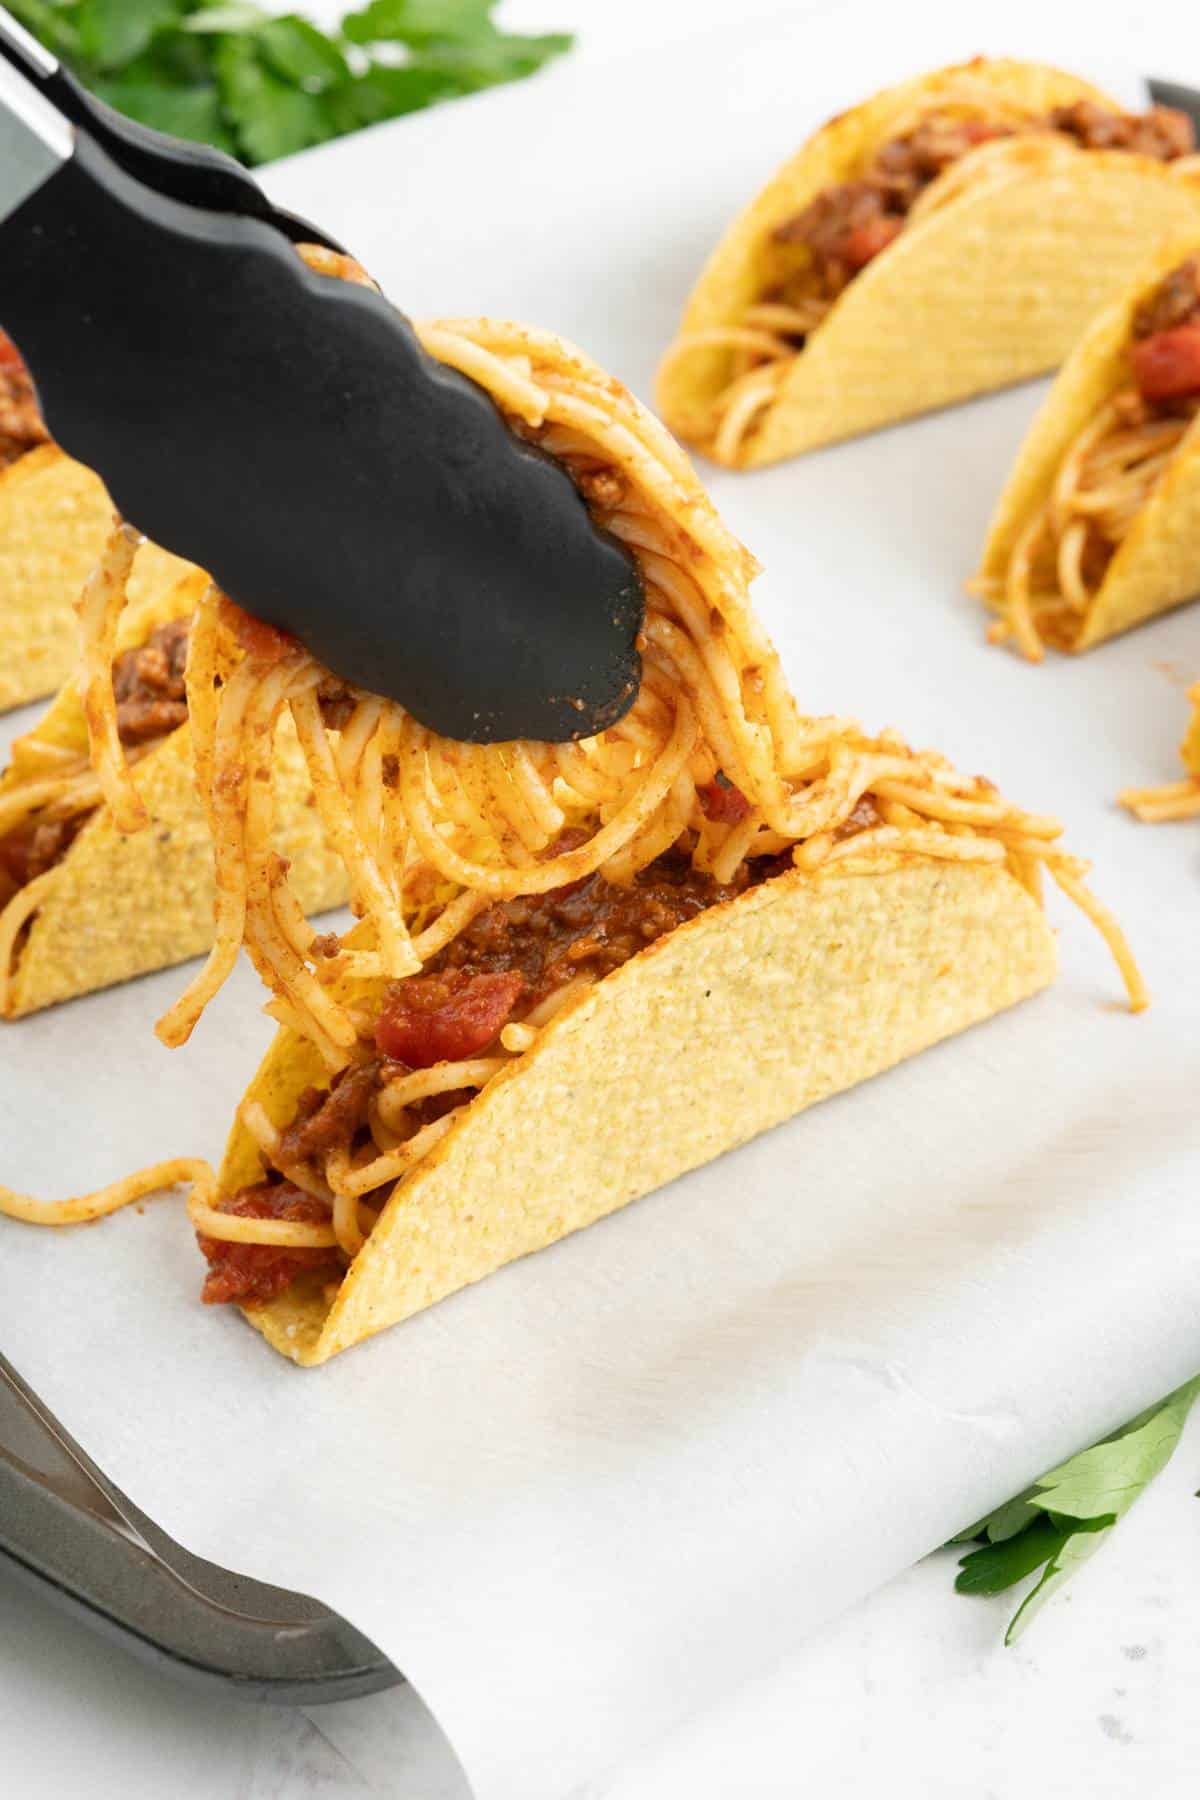 Filling up the tacos with the spaghetti filling.